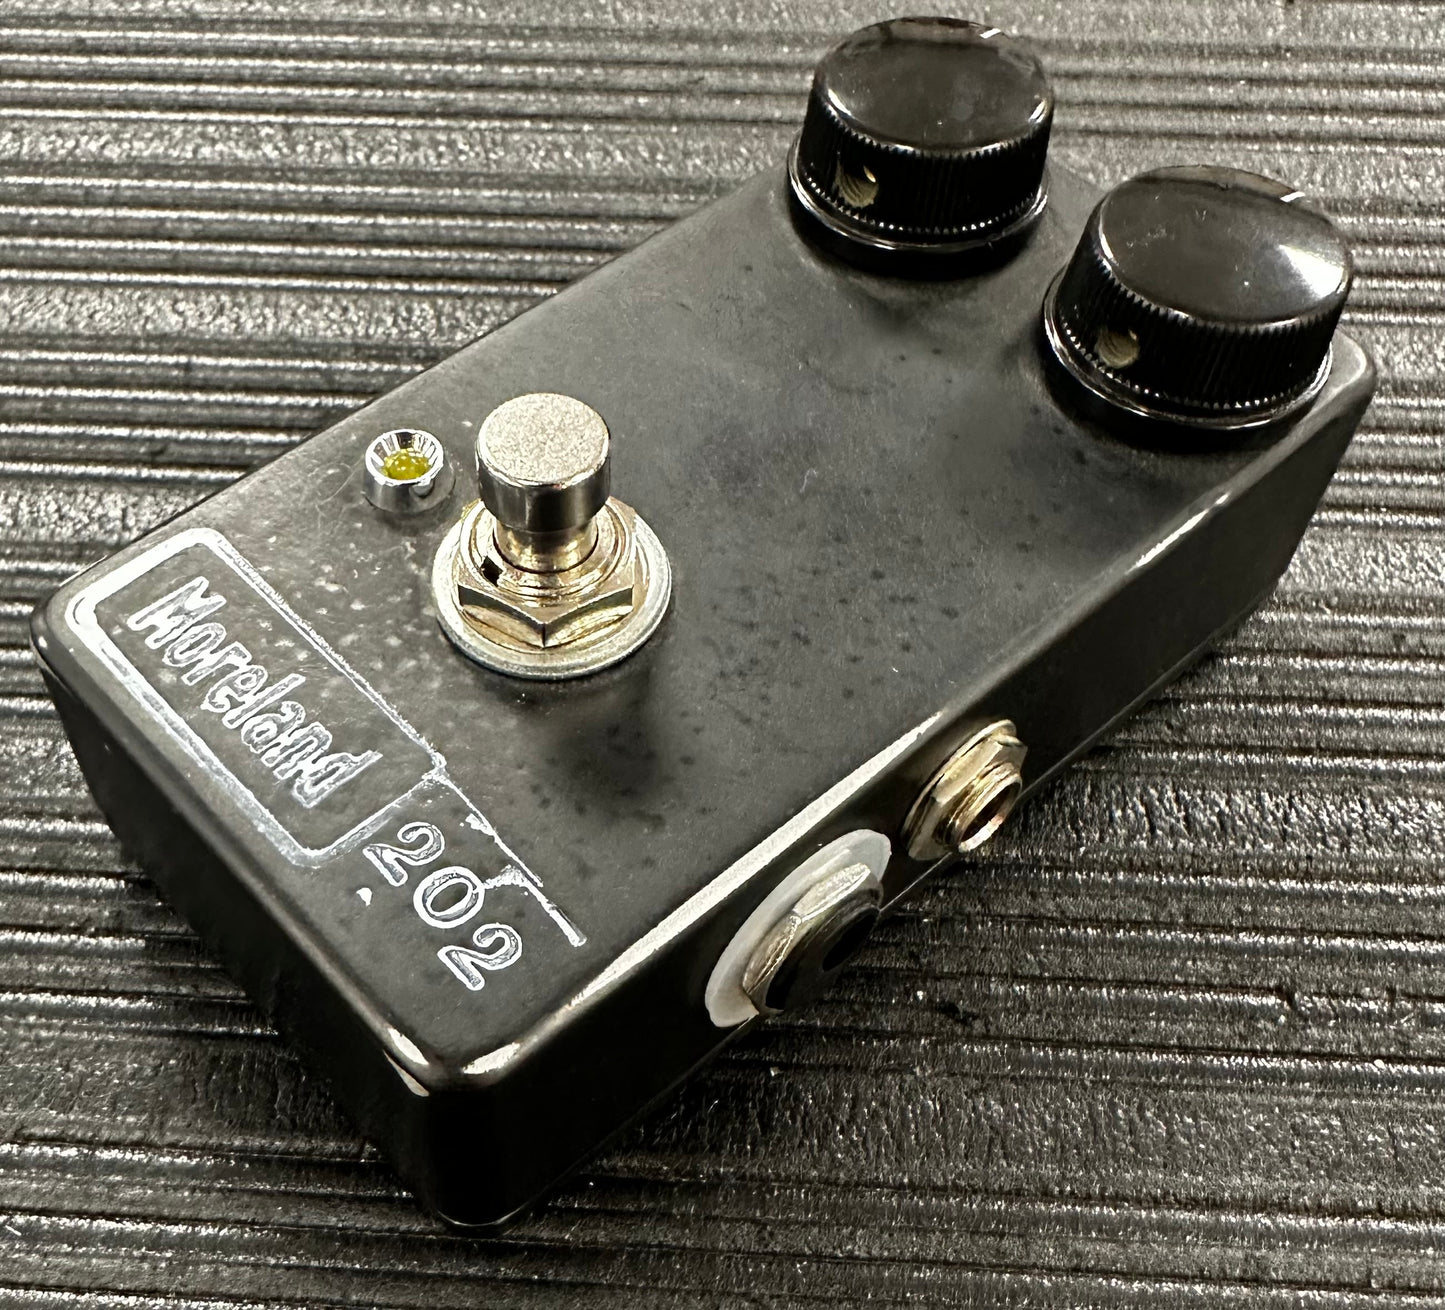 Top angle of Used Moreland Magnetics 202 Distortion Pedal #5 of 5 TSS2813.